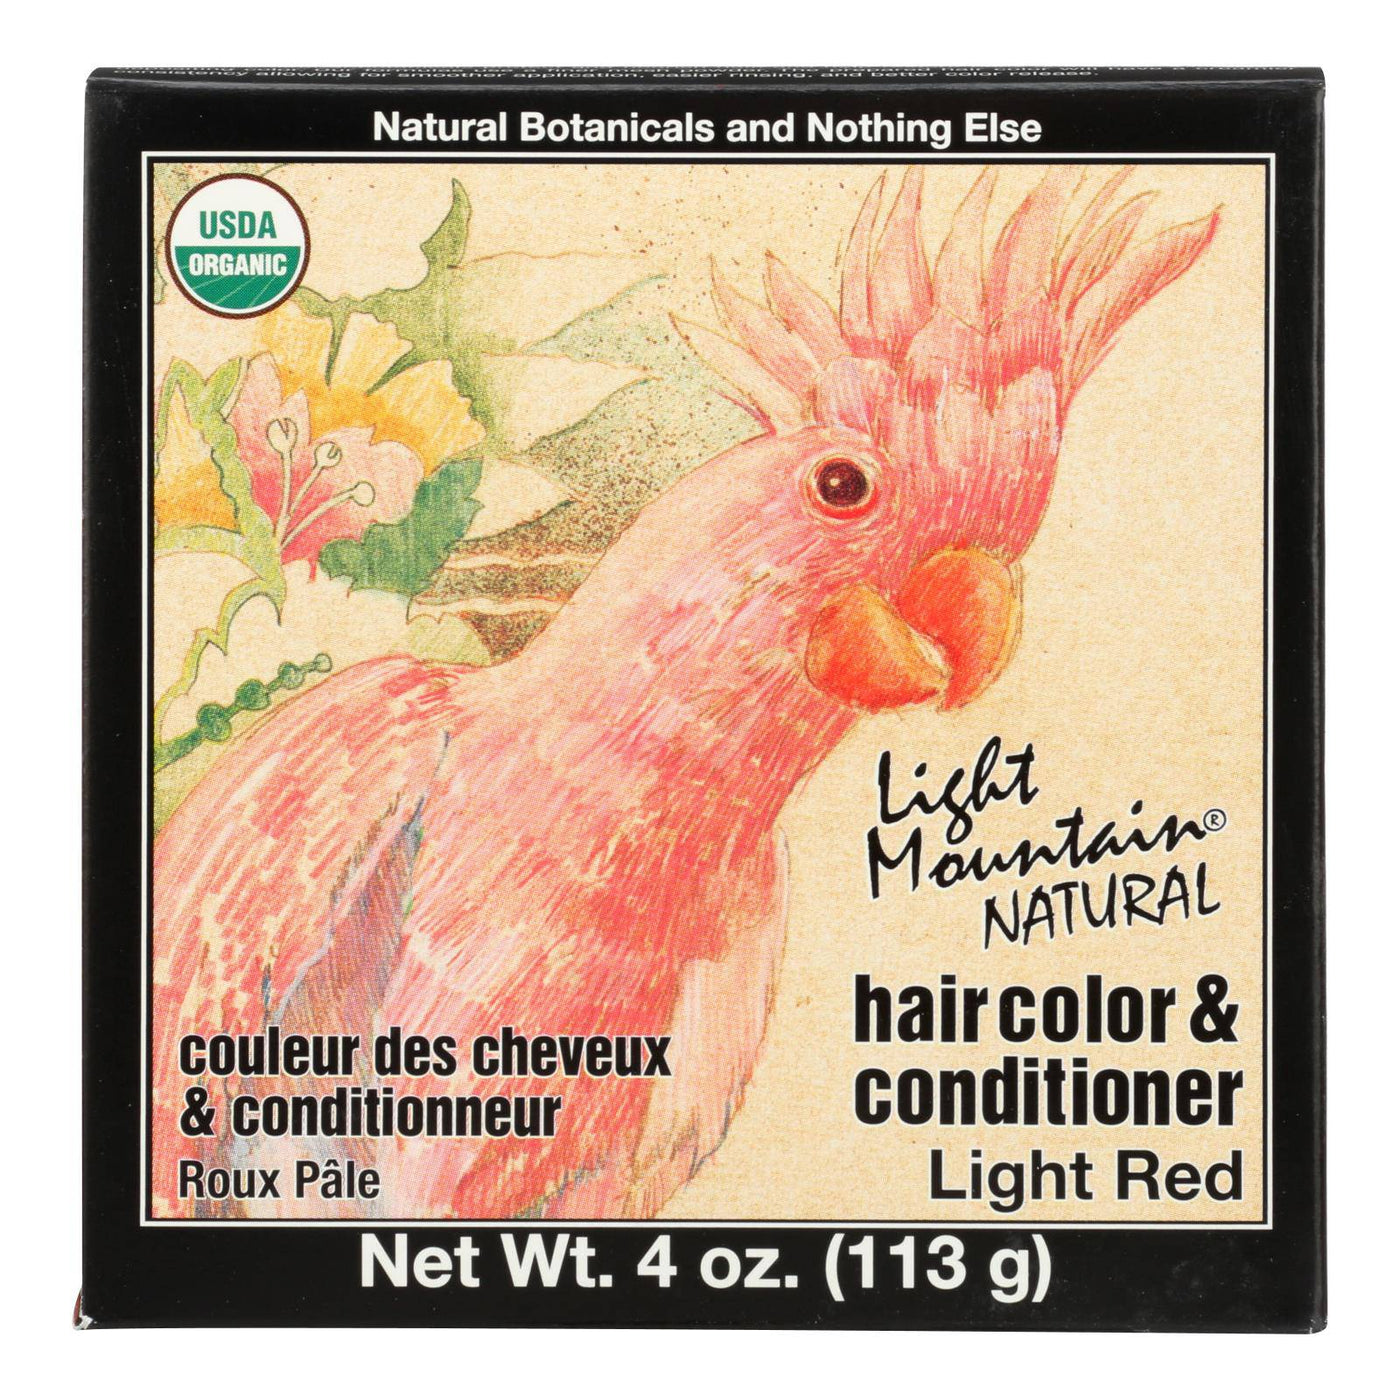 Buy Light Mountain Hair Color - Light Red - Case Of 1 - 4 Oz.  at OnlyNaturals.us